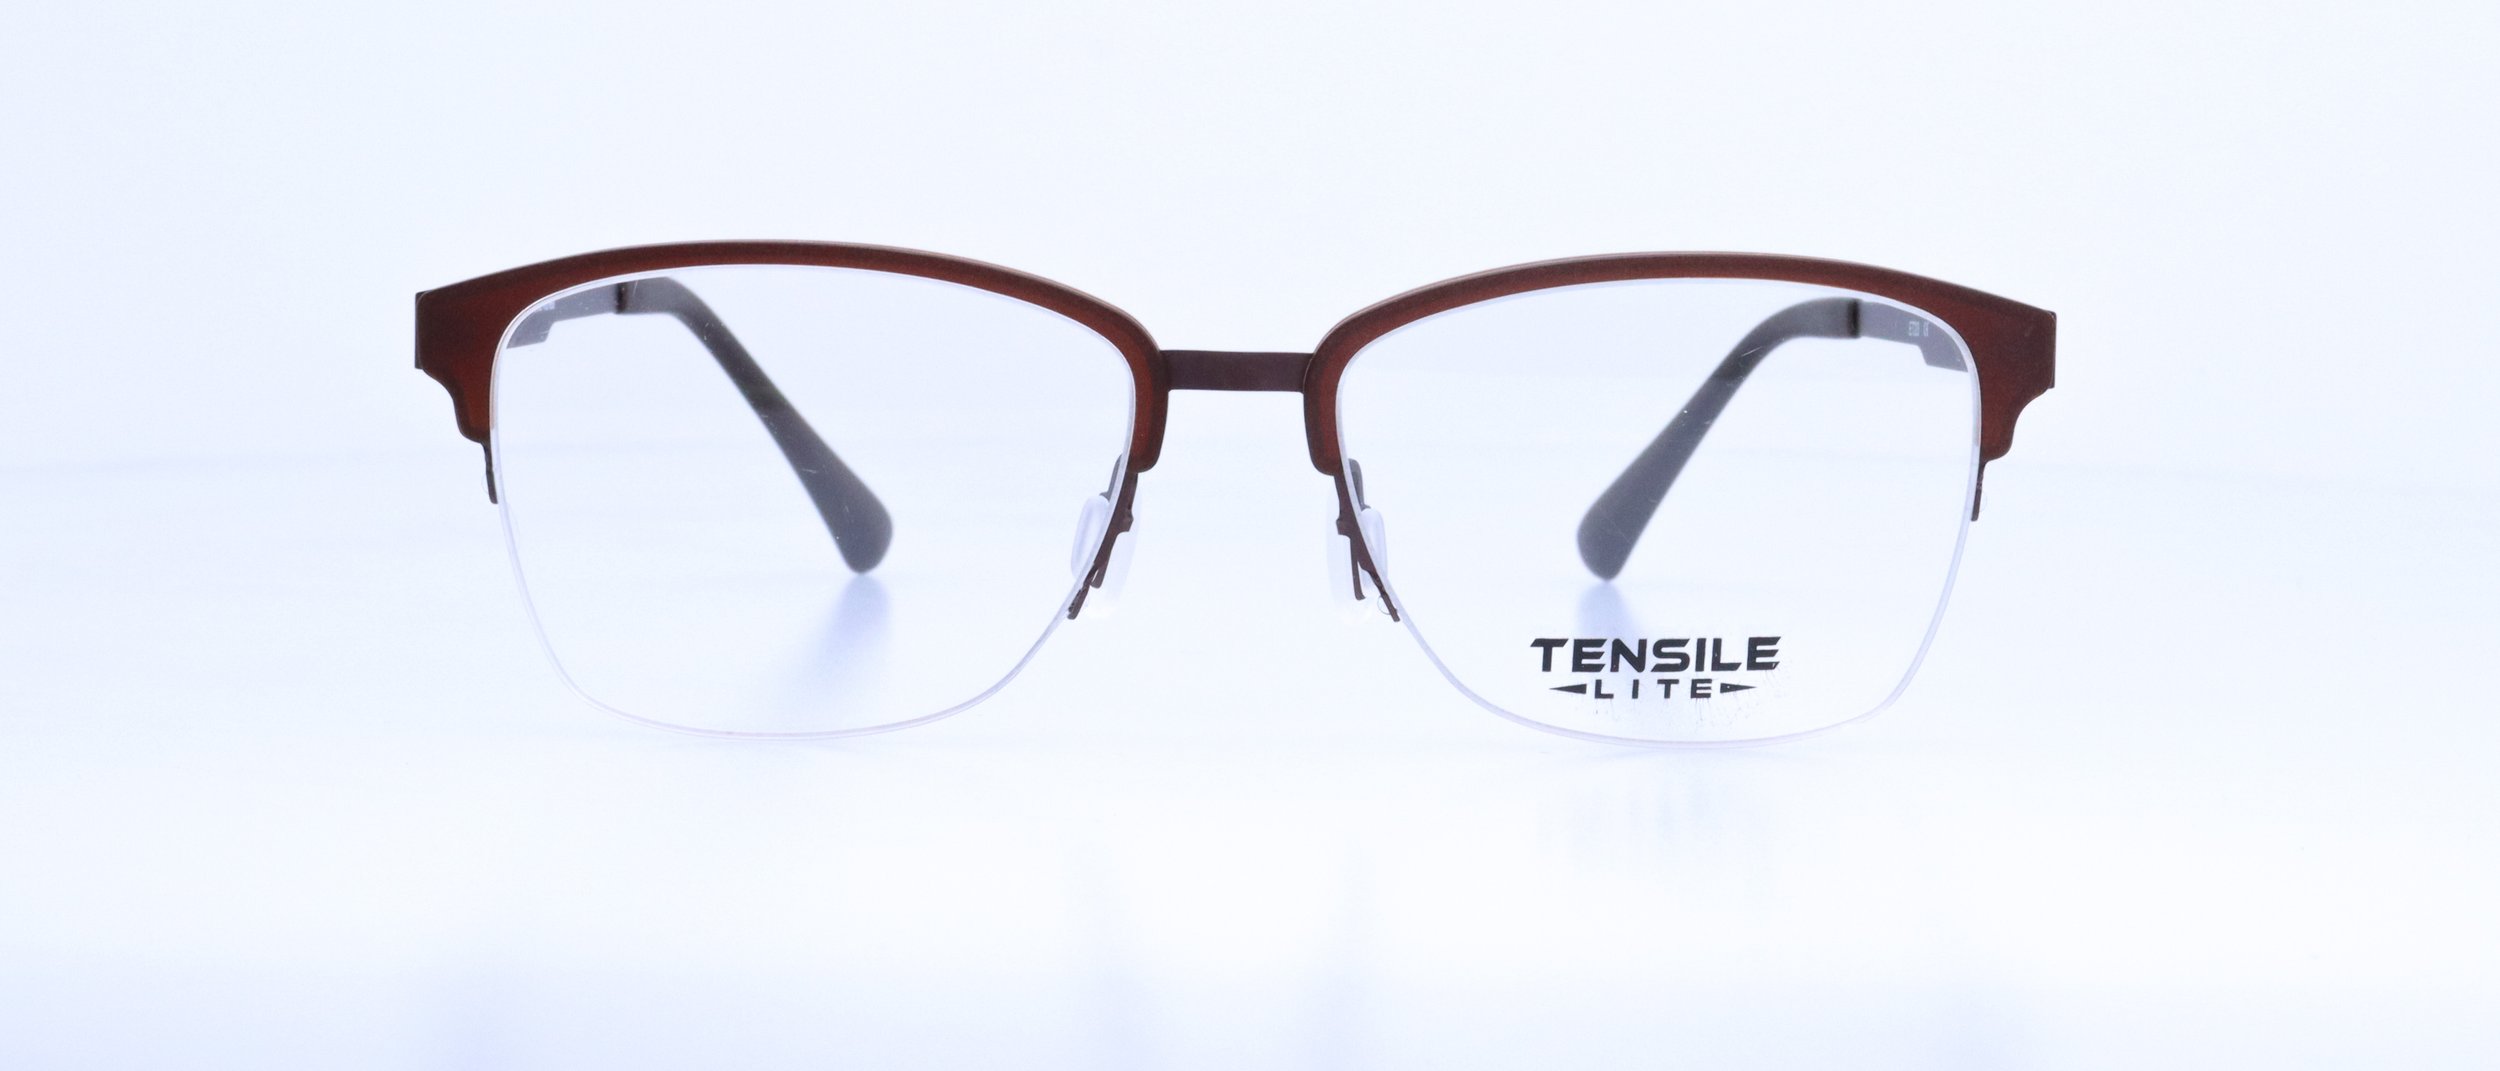  NEW!!! TL705: 52-17-140, Available in Brown or Navy 